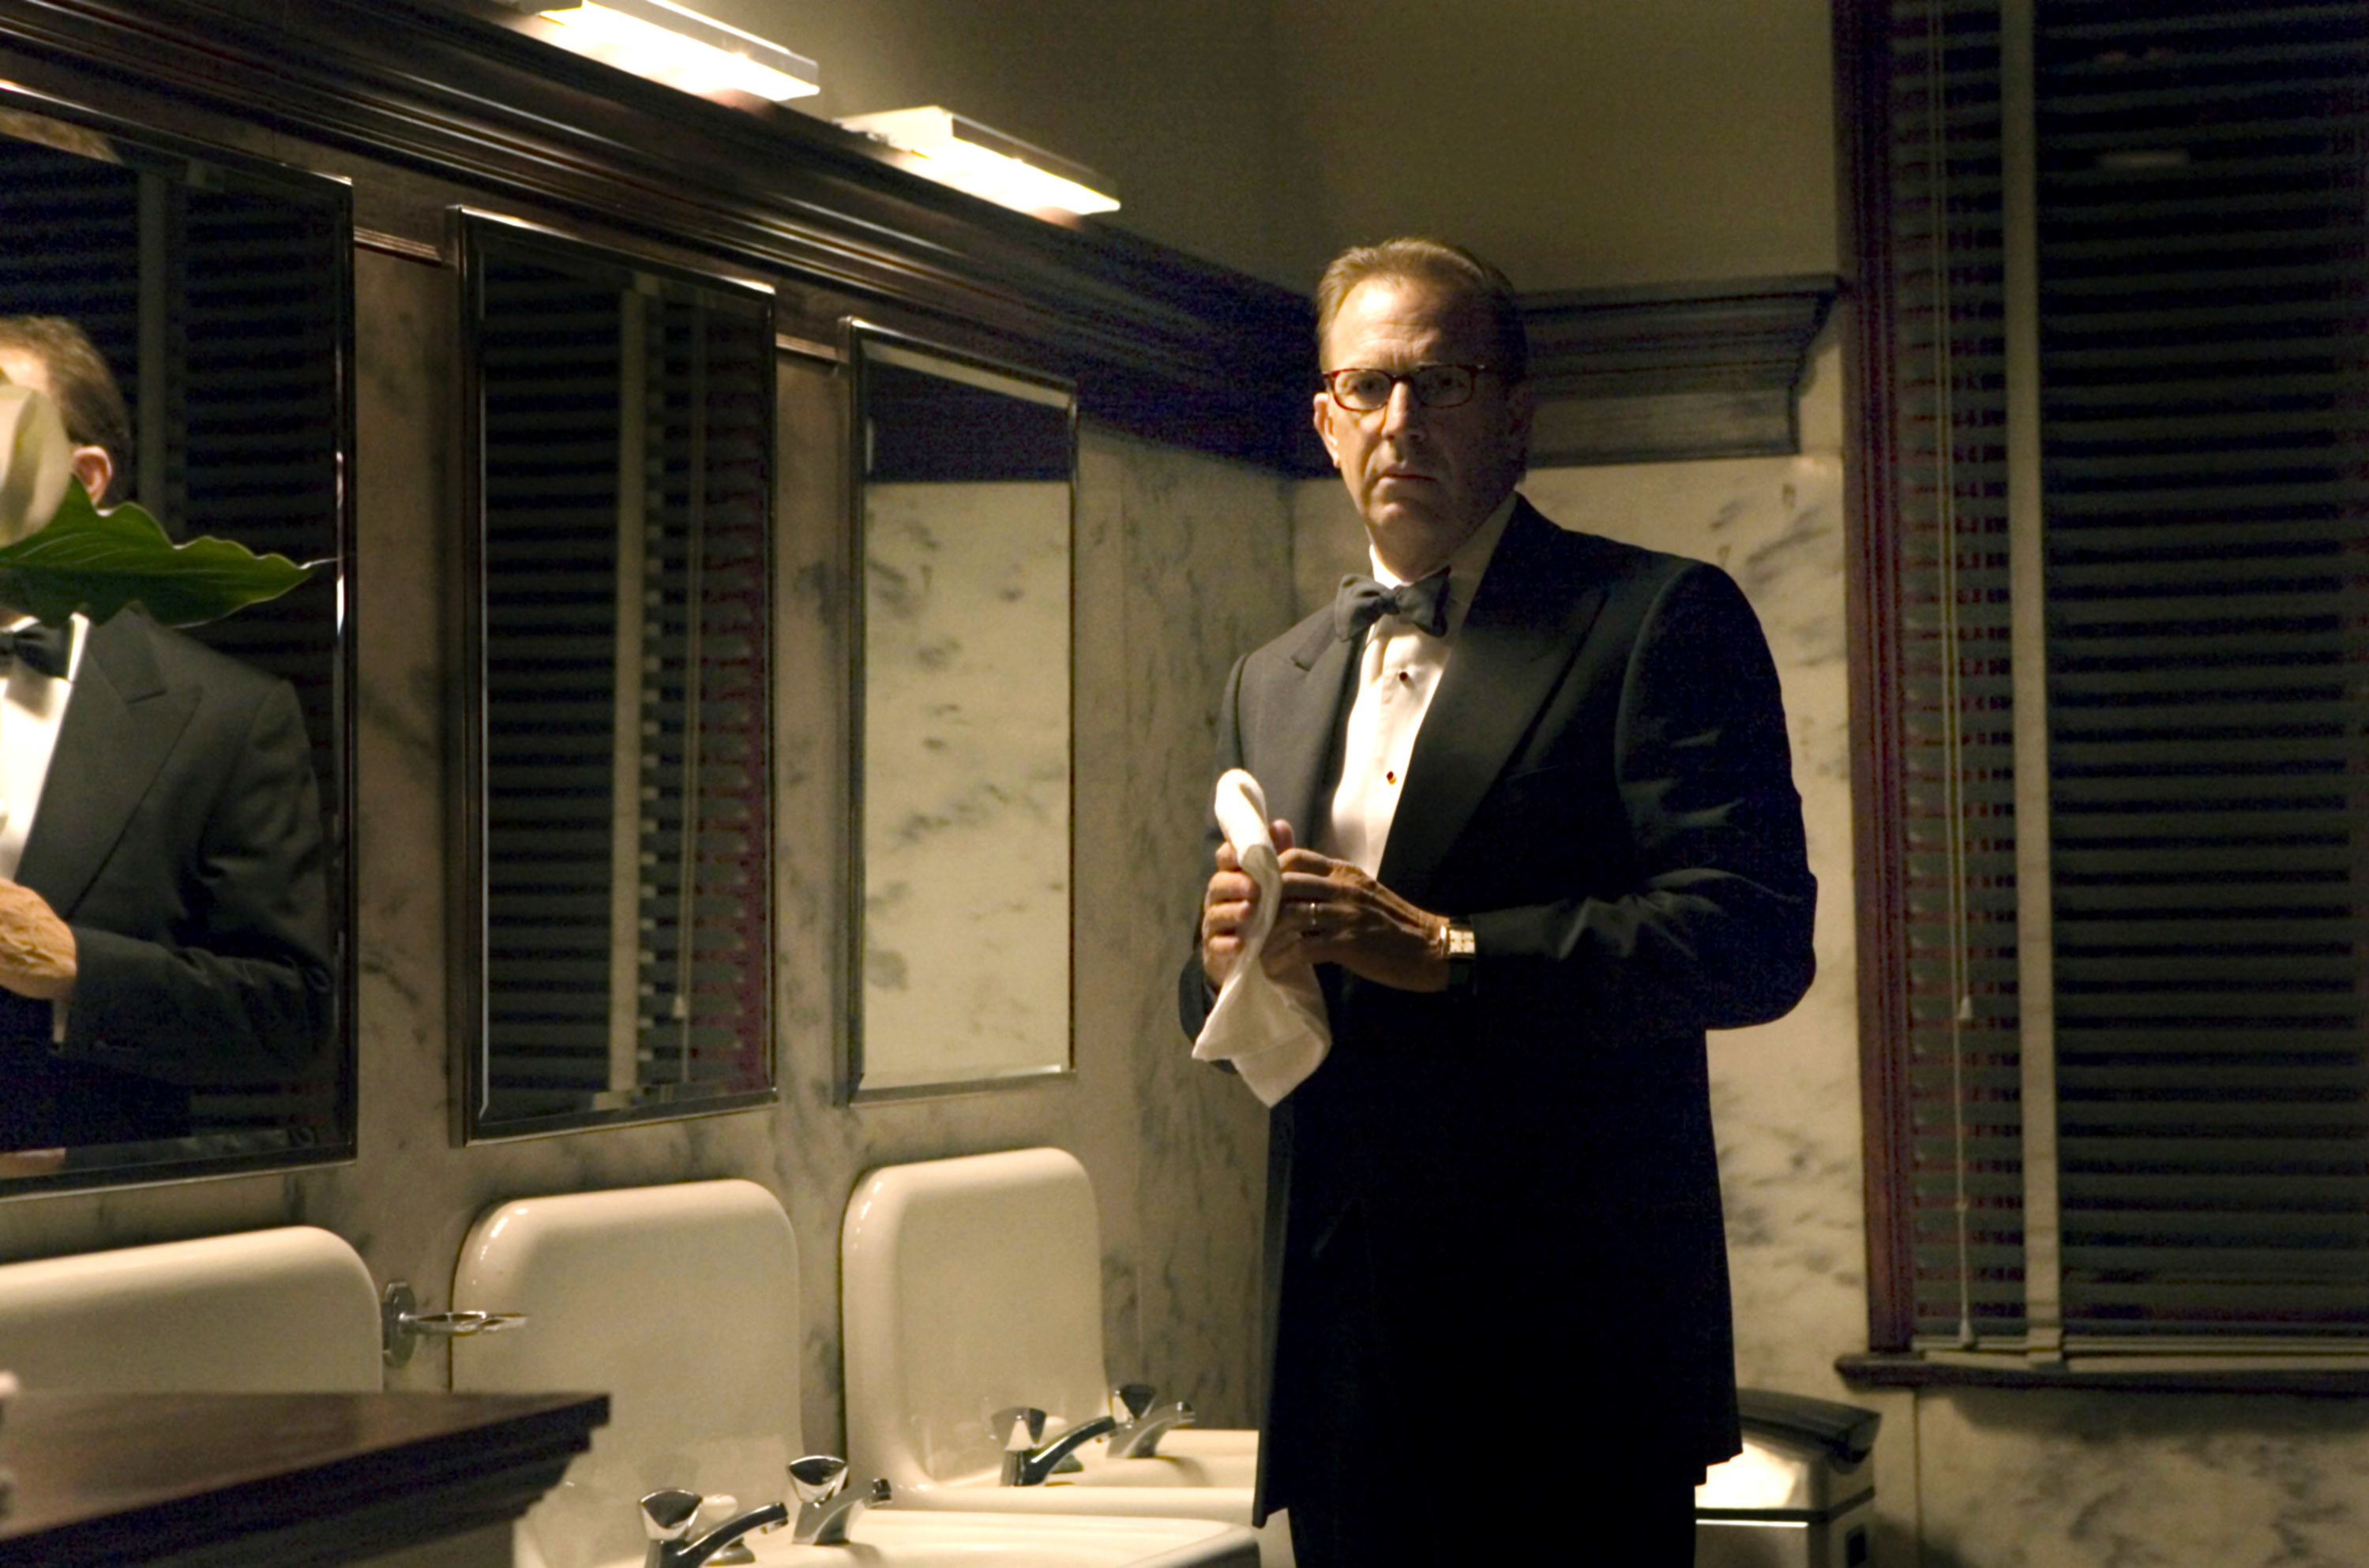 A man in a tuxedo washes his hands in a fancy bathroom